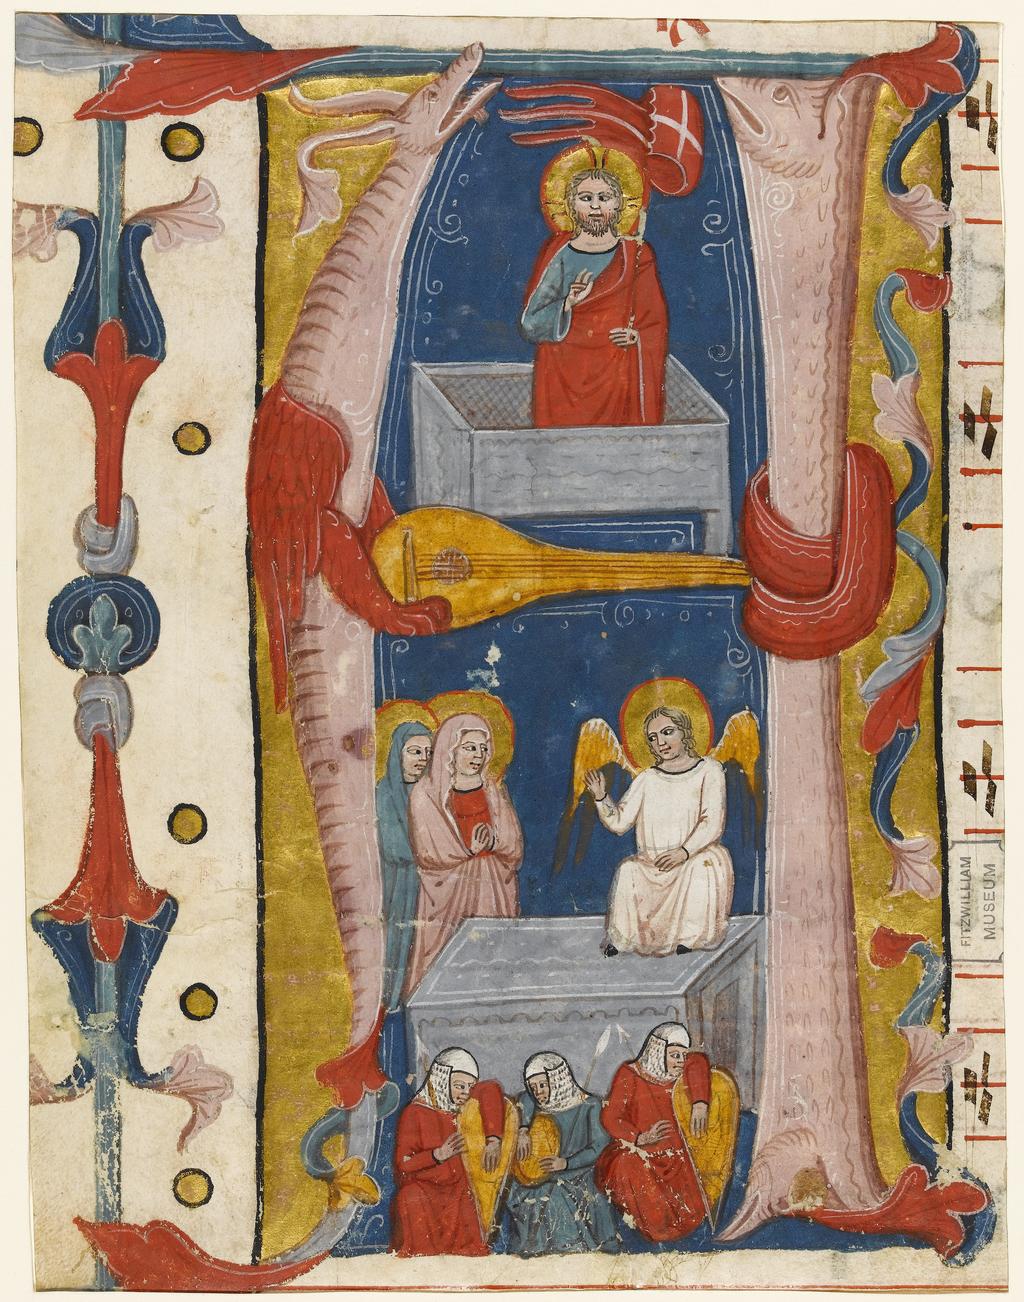 An image of Illuminated manuscript. Initial from an Antiphoner. Production Place: Central Italy. Parchment, gold, 226 x 174 mm, four musical staves ruled in red ink, four lines of fragmentary text ruled in plummet, circa 1350.CONTENTS: On reverse, the antiphons for the psalms of the first nocturn at Matins for Easter Sunday, [Postulavi patrem meum alleluia de]dit michi gentes [alleluia in here]ditatem alleluia … Evovae. A[ntiphona] Ego dor[mivi et somnu]m cepi et resurre[xi]; the initial introduced the responsory to the first lesson at Matins for Easter Sunday (Angelus domini descendit de celo), and would have been on the verso of the original leaf. DECORATION: Historiated initial, with staves formed of an elongated dragon and fish, and cross-bar formed of a stringed instrument, on a ground of solid gold with acanthus motifs extending to form border in margin: [A] The Resurrection, in the lower compartment, the angel appears to two Marys while the soldiers sleep, in the upper compartment, Christ stands triumphant in the empty tomb. ORNAMENTATION: on reverse, one red initial with brown pen flourishing, height of width between staves.